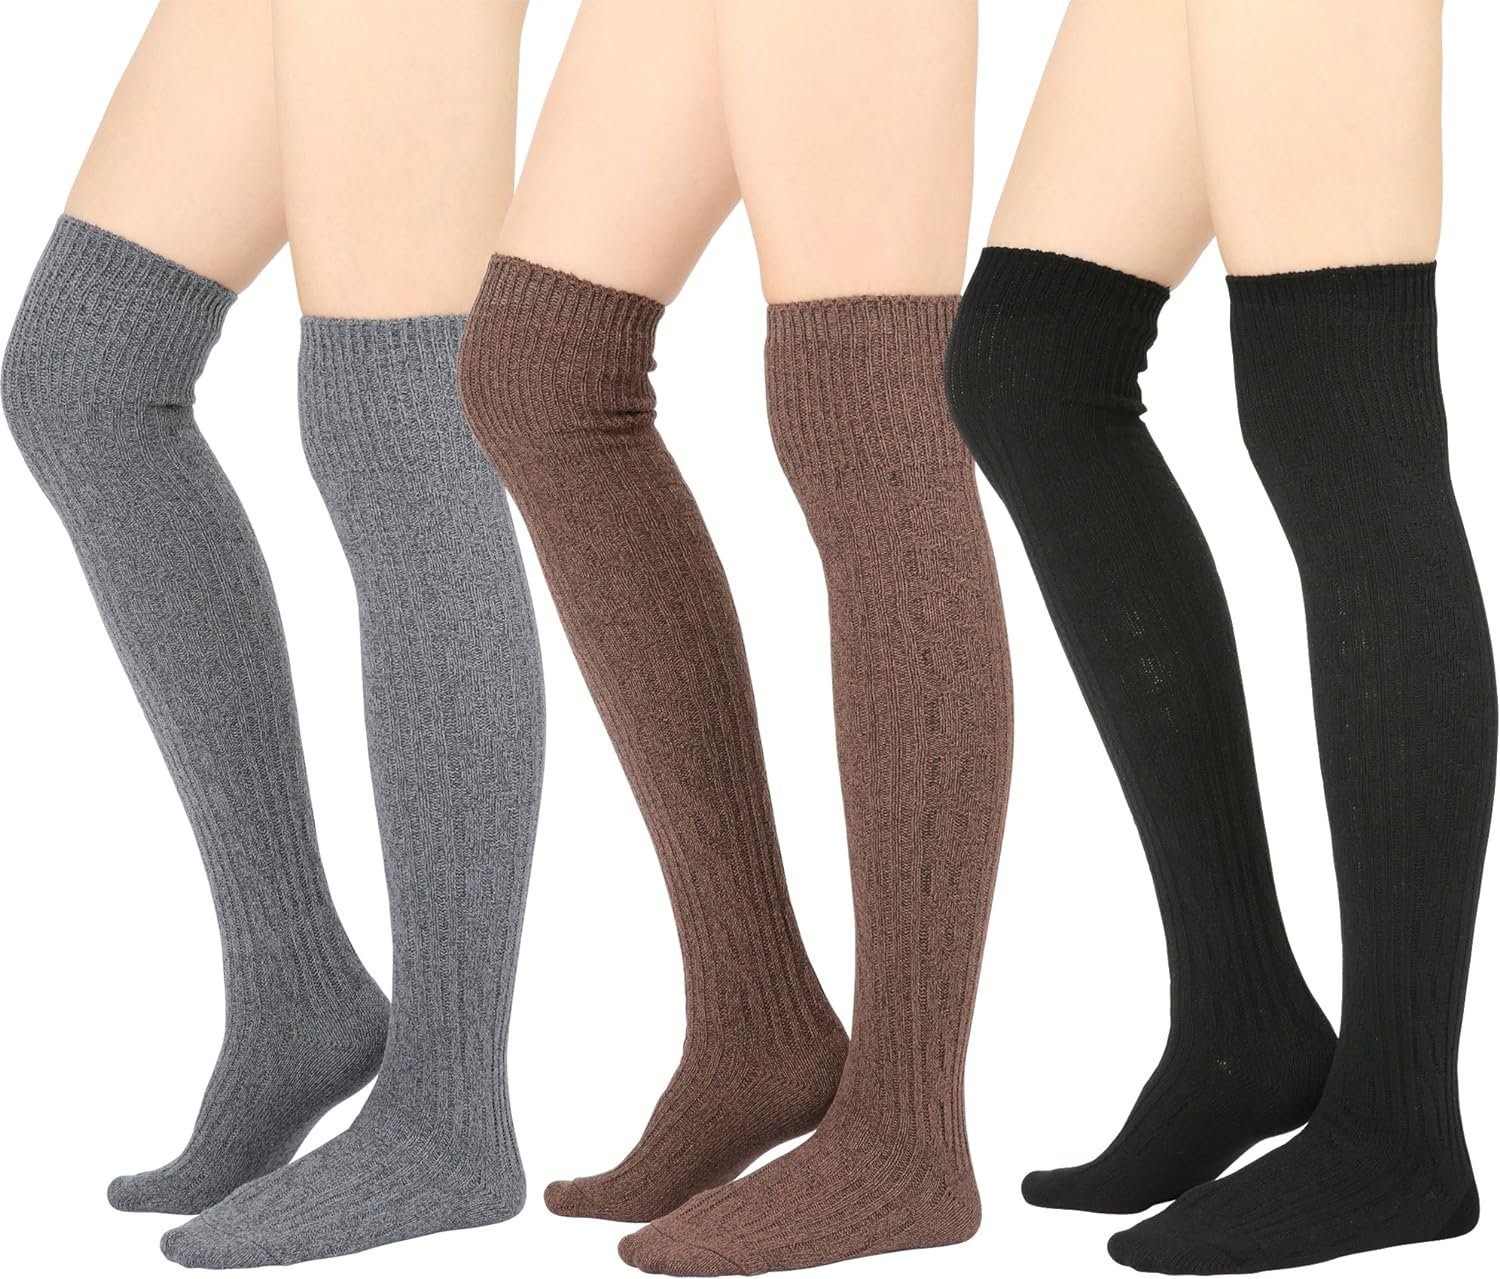 STYLEGAGA Cozy Cable Knit Socks Review